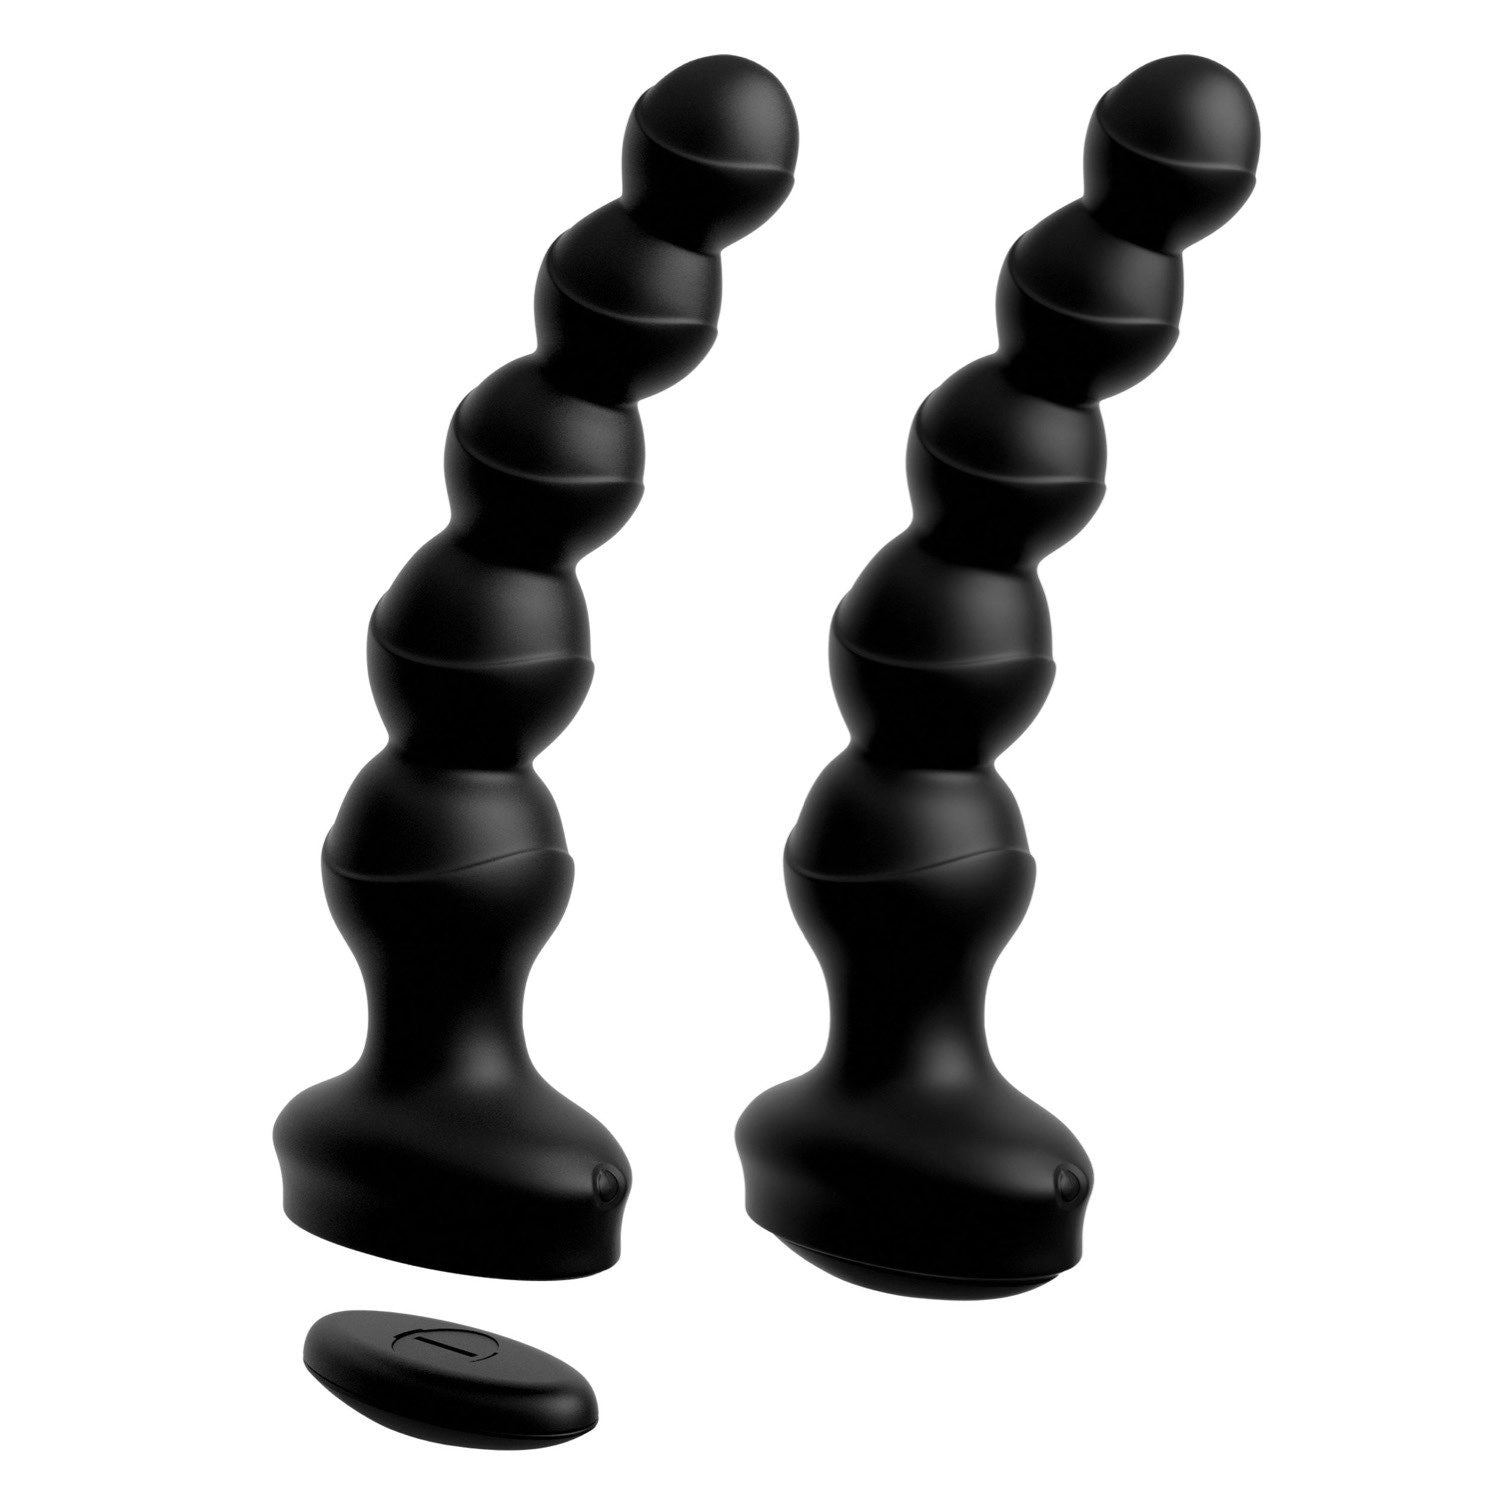 3Some Wall Banger Beads - Black USB Rechargeable Vibrating Anal Beads with Remote Control by Pipedream